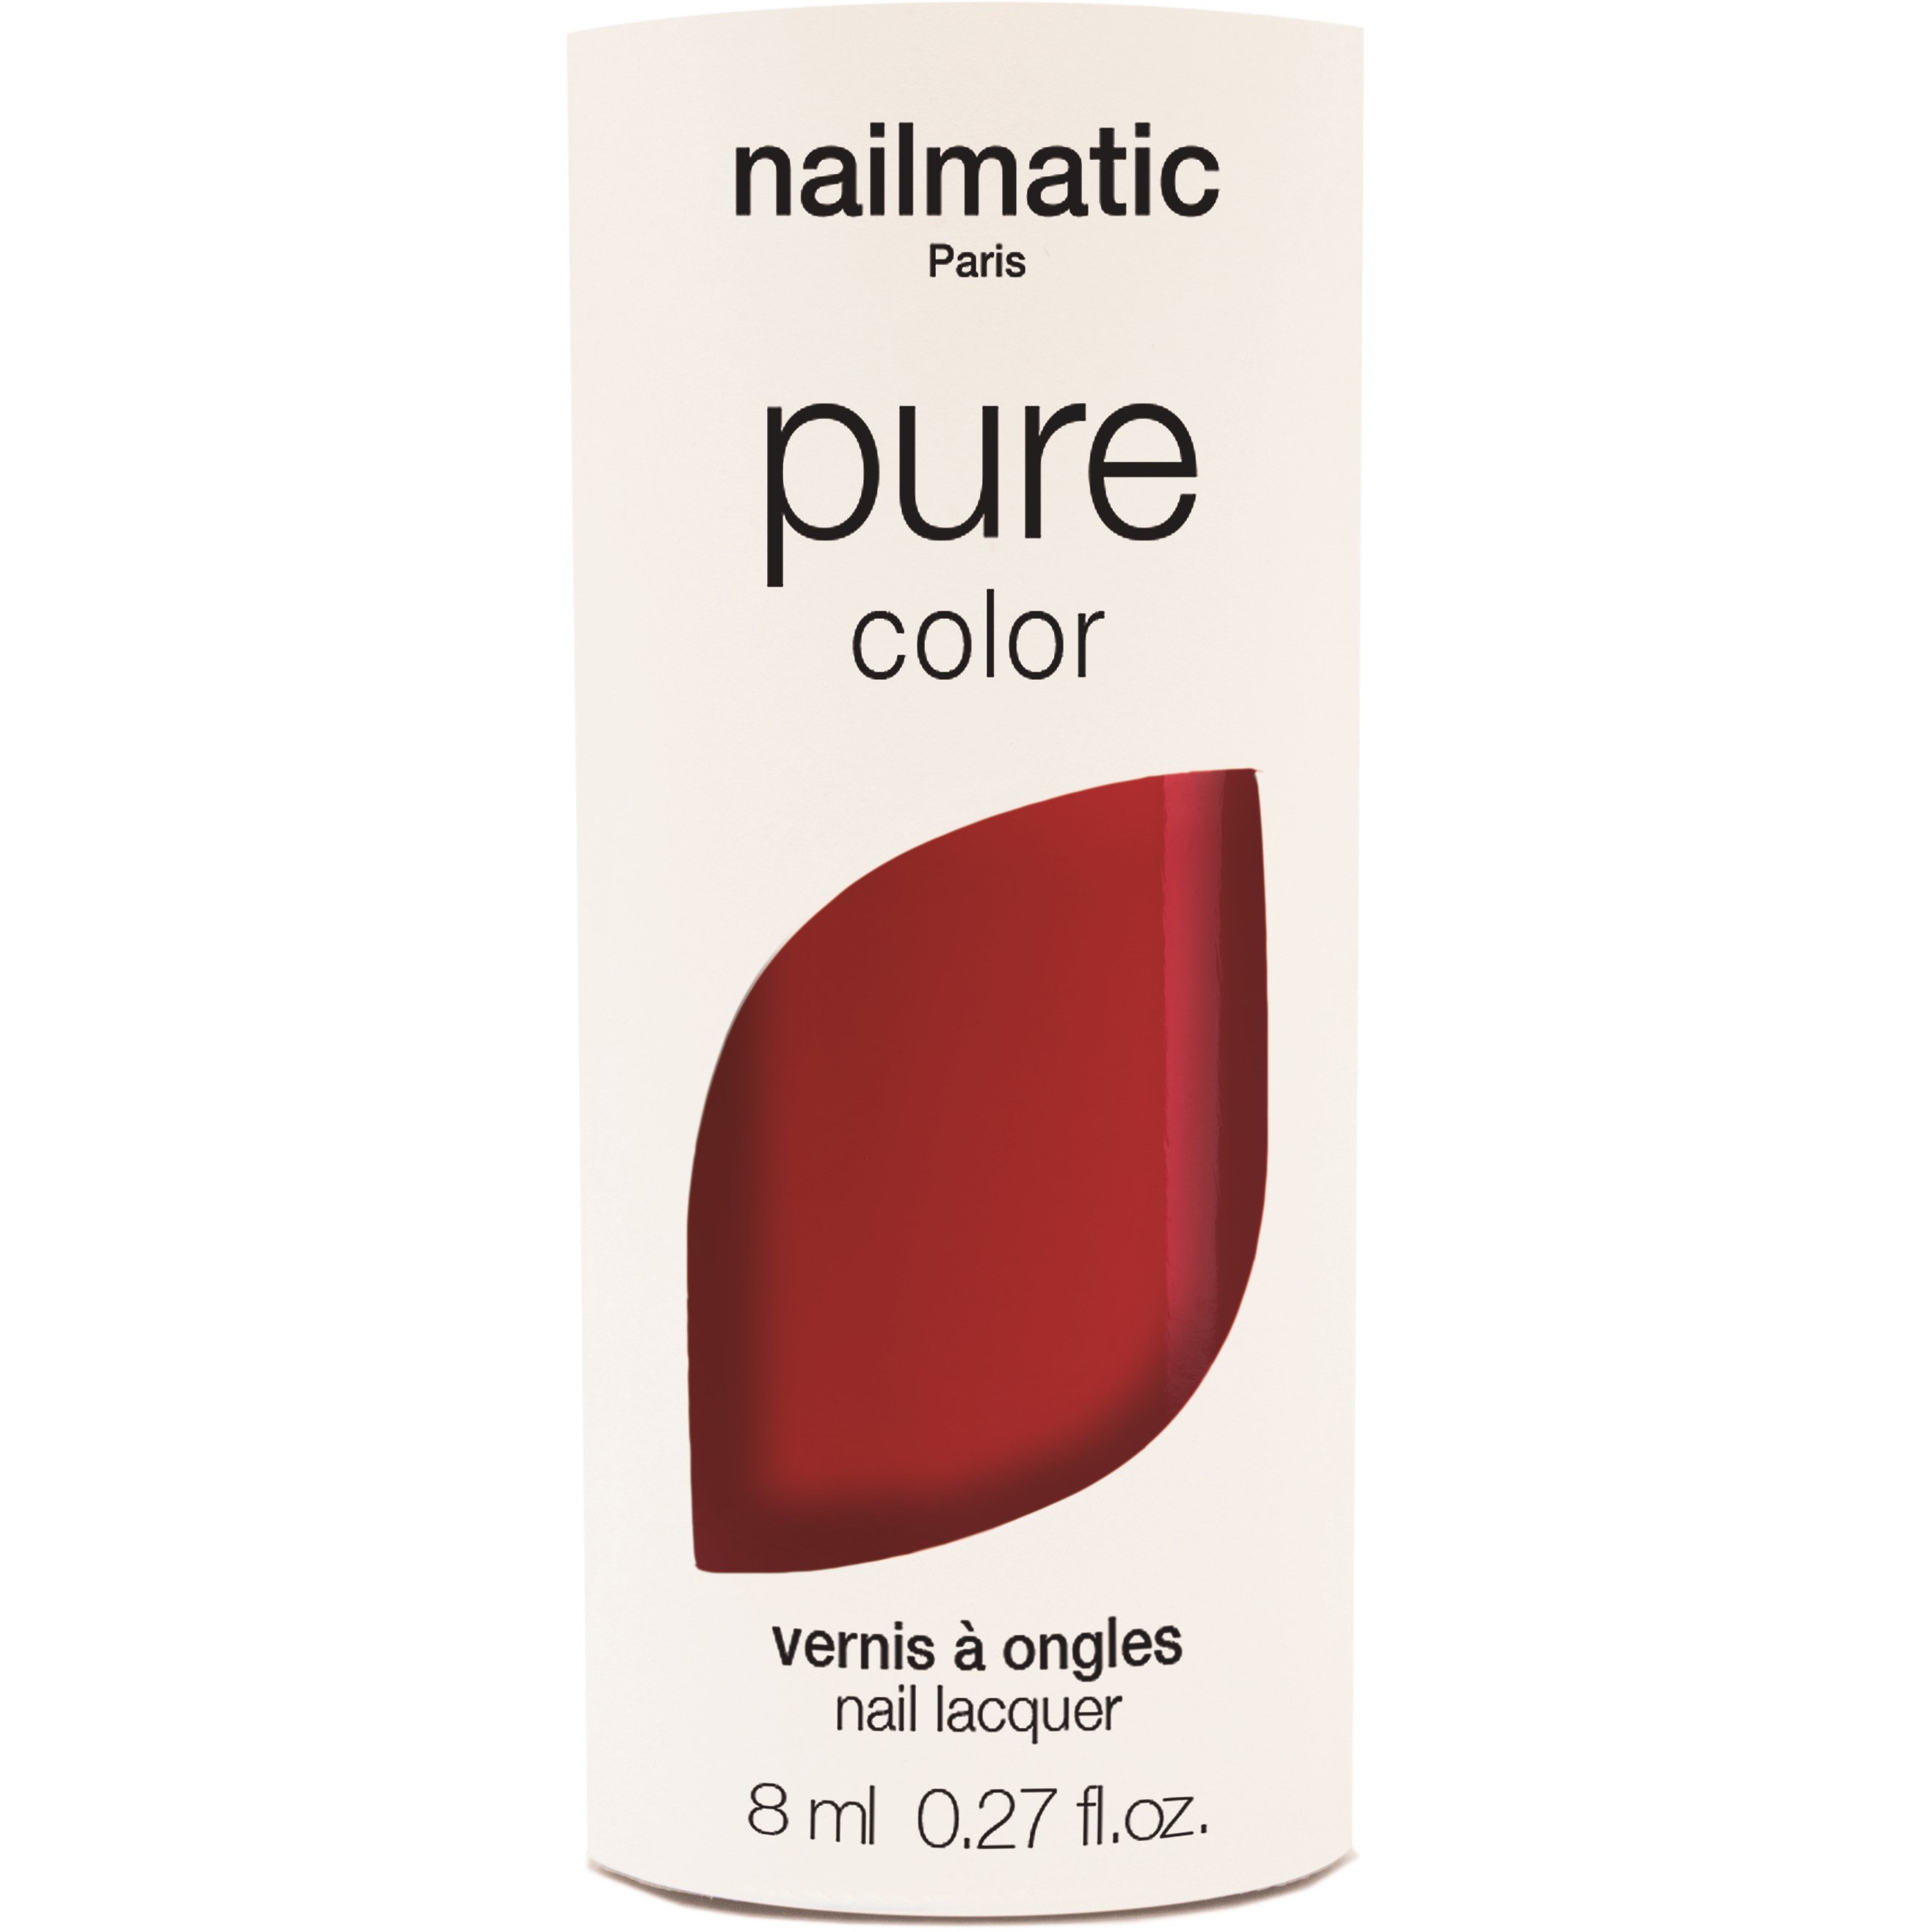 Nailmatic Pure Colour Dita Rouge Profond/Deep Red Dita Rouge Prof